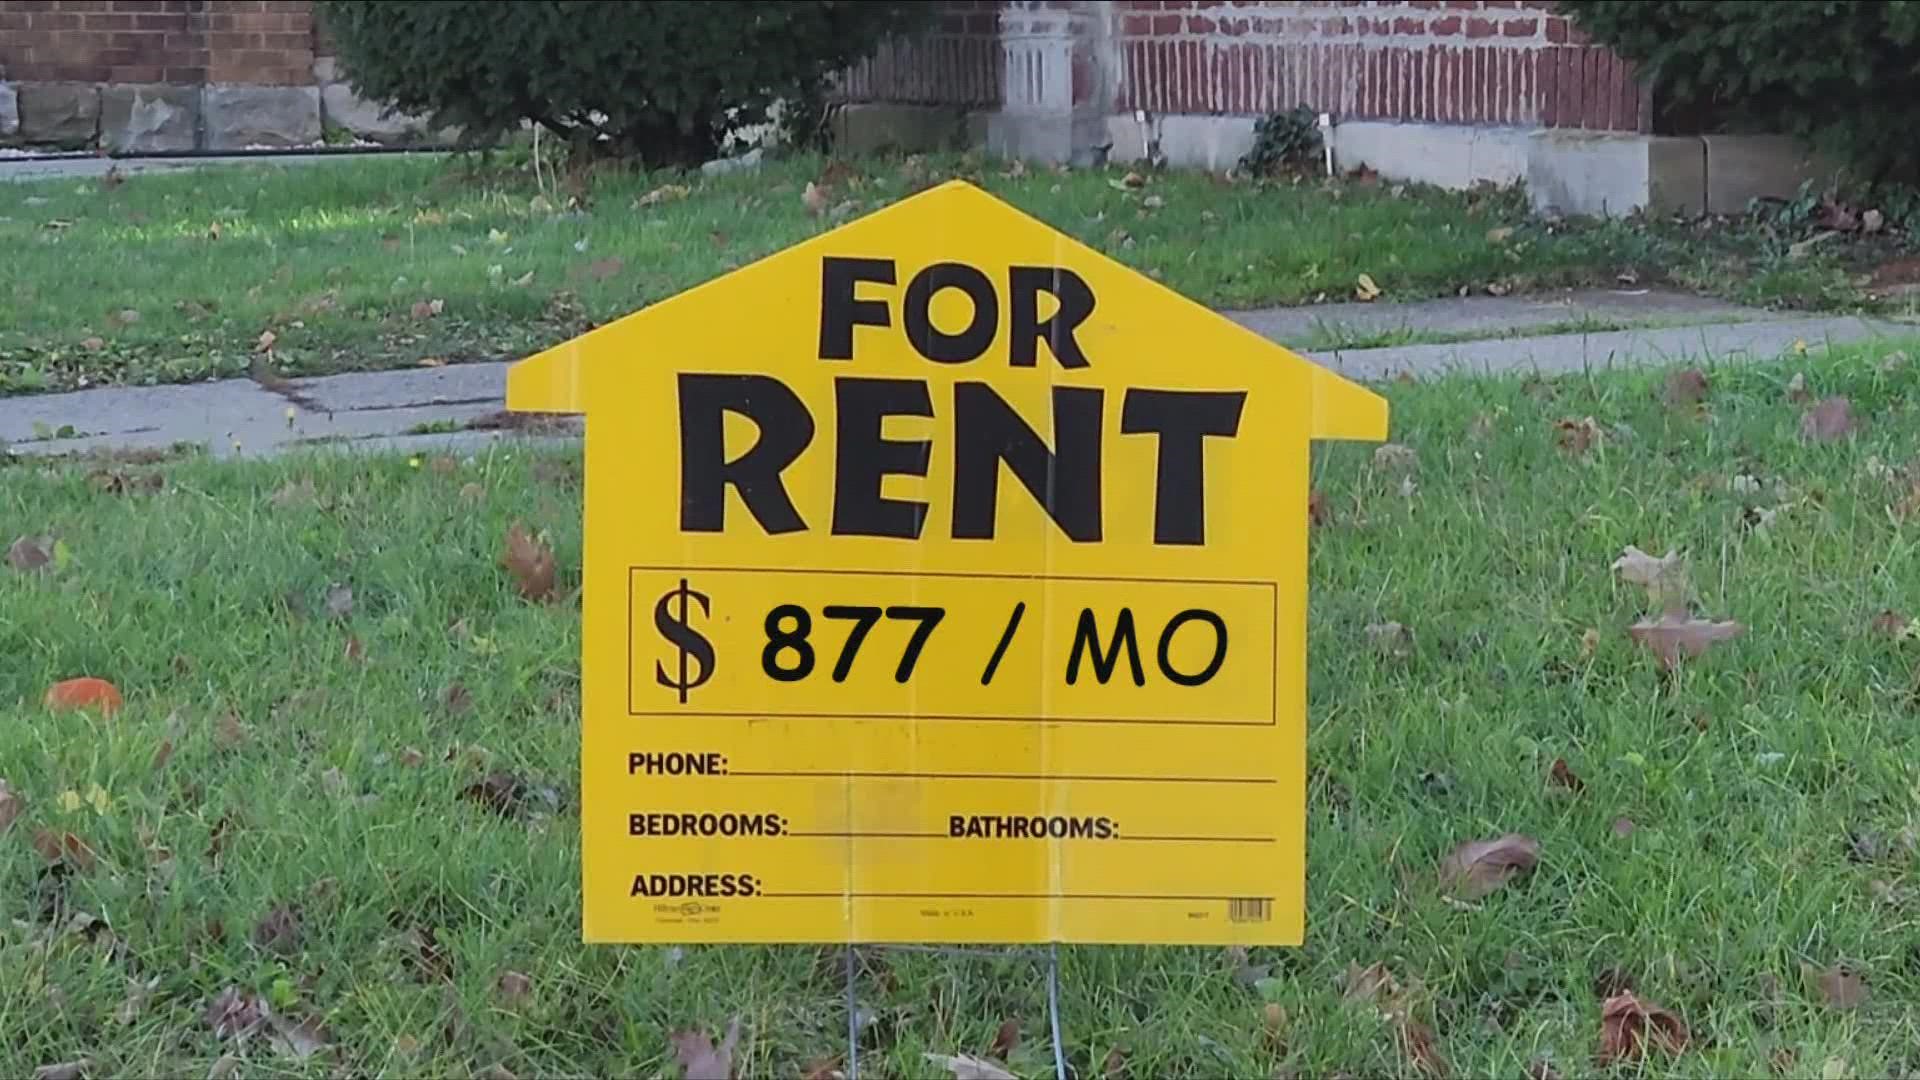 Landlords in Erie County - primarily in Buffalo - are moving to evict tenants in greater numbers than almost anywhere in the state.